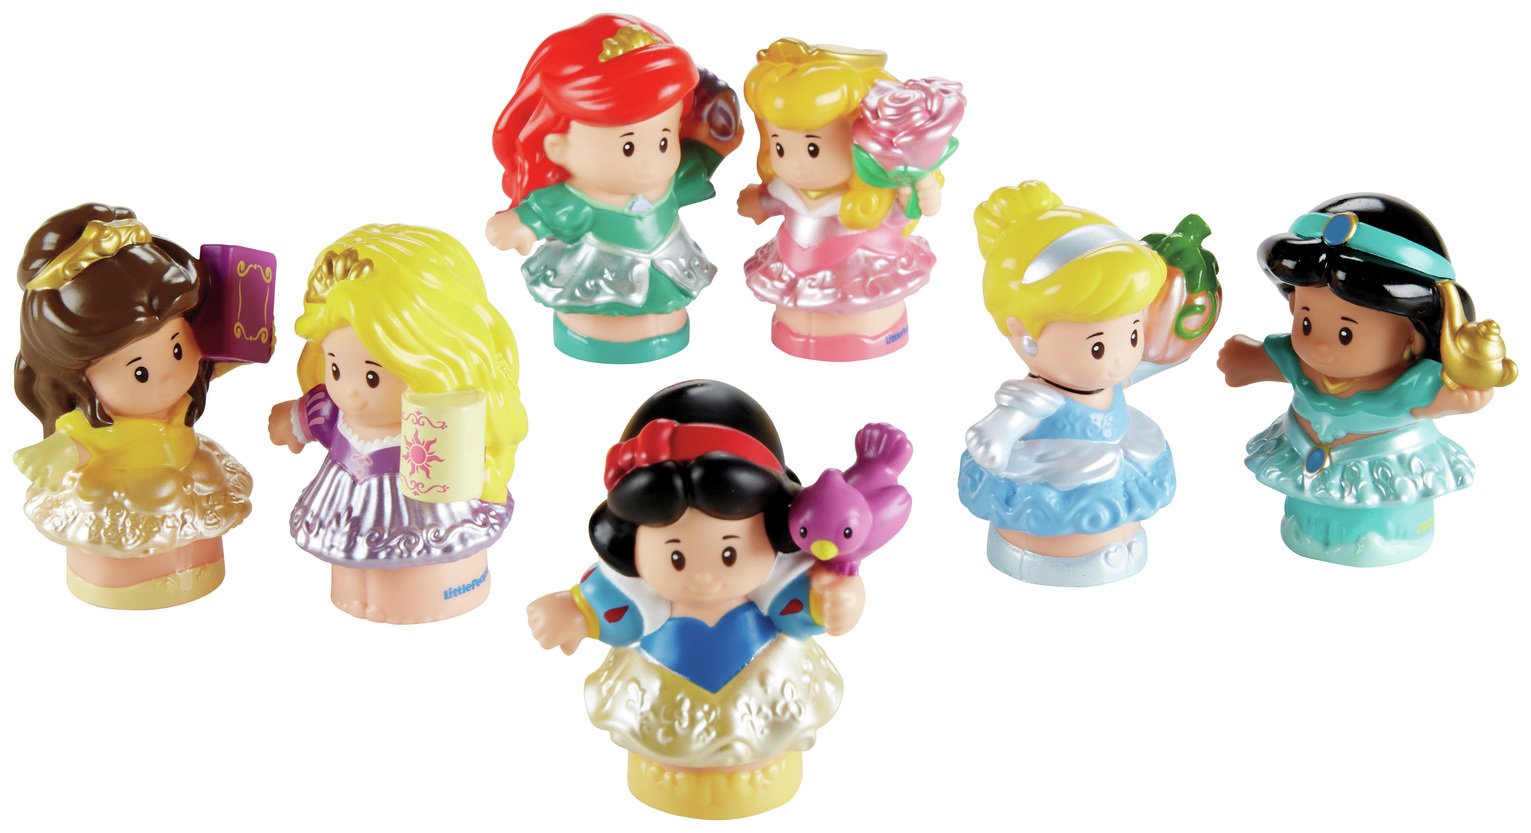 Fisher-Price World of Little People/Disney Princess Figures Review